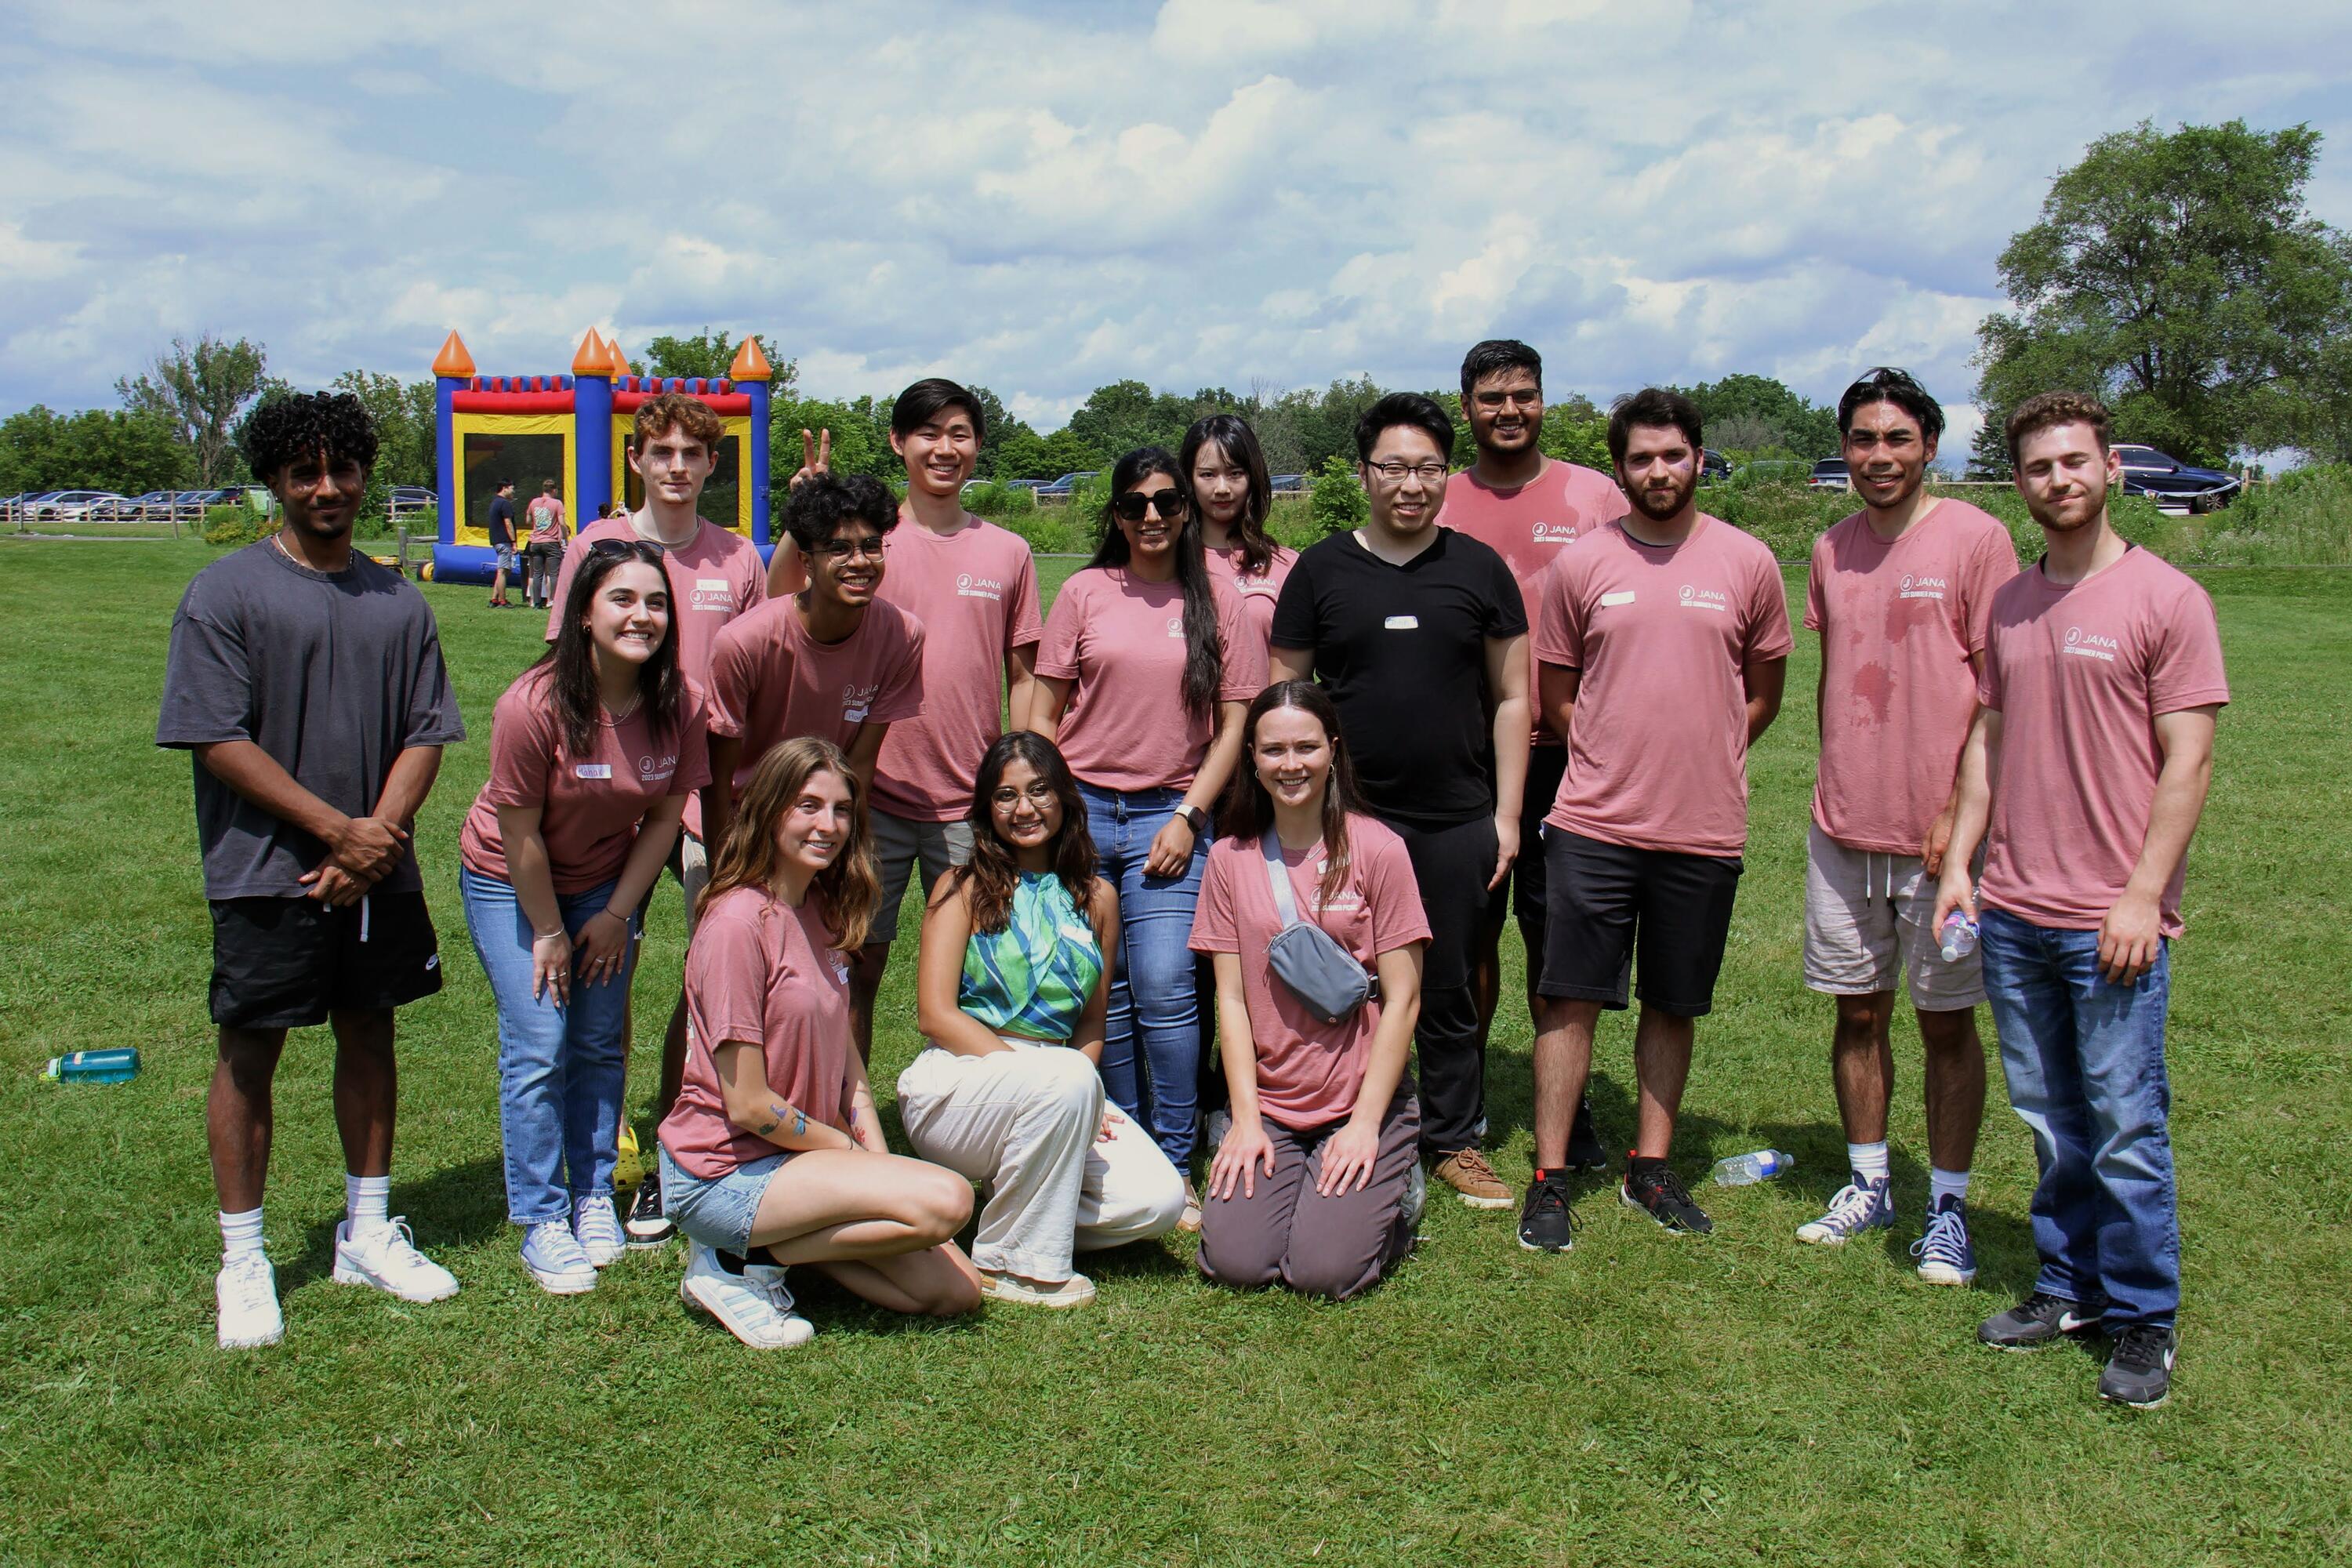 Shashwat and the team at JANA posing in a soccer field with a bouncy castle in the distance. 